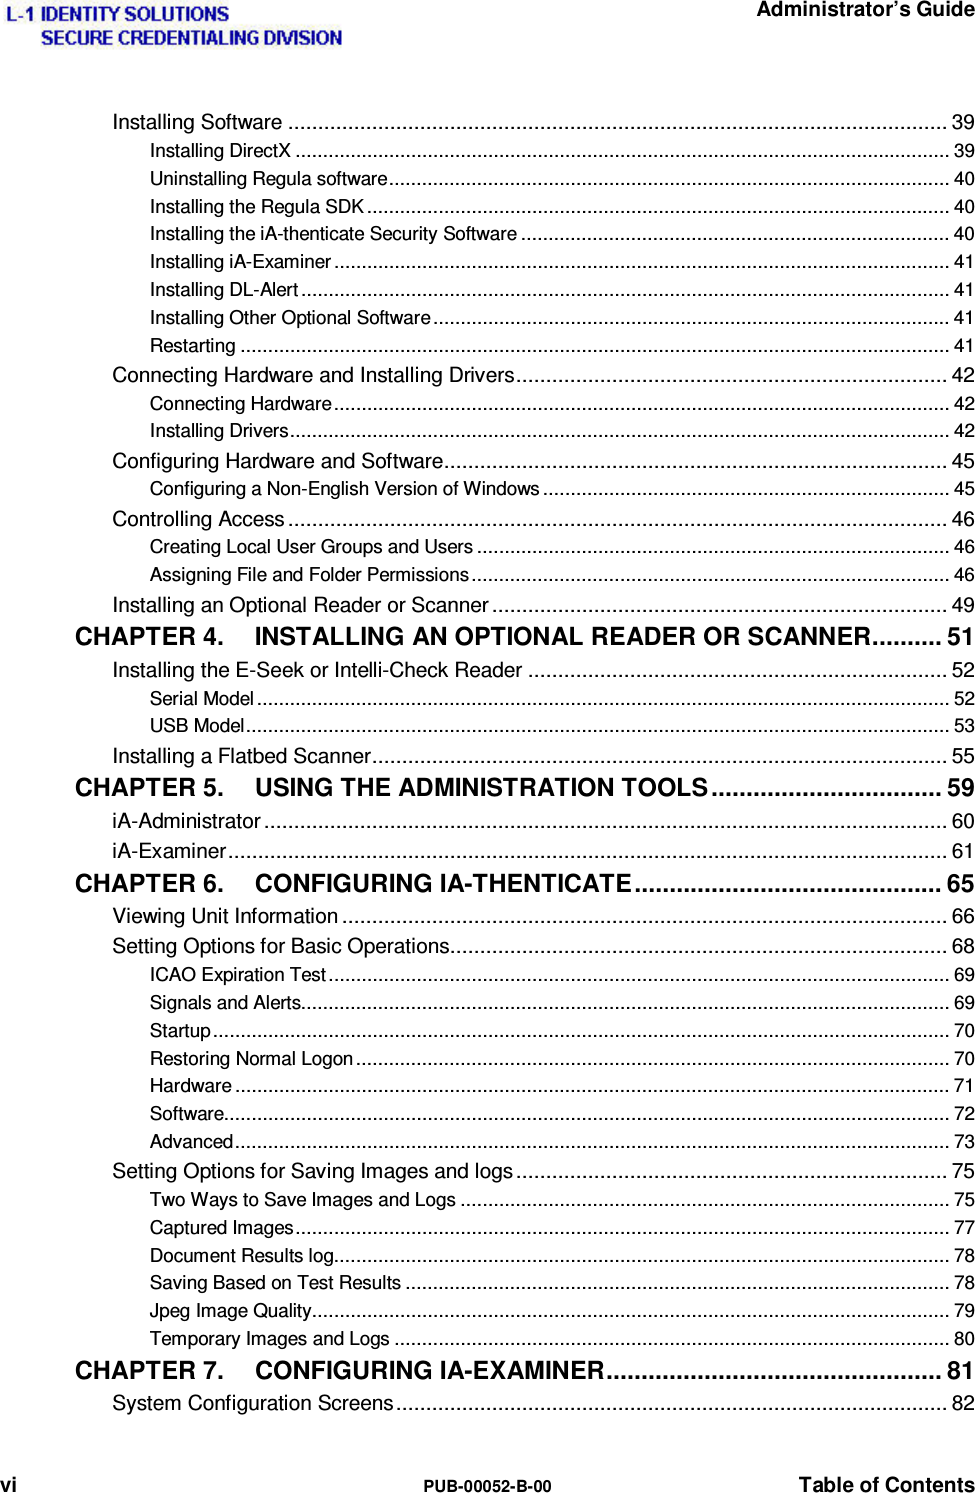   Administrator’s Guide vi  PUB-00052-B-00  Table of Contents Installing Software .............................................................................................................. 39 Installing DirectX ....................................................................................................................... 39 Uninstalling Regula software ...................................................................................................... 40 Installing the Regula SDK .......................................................................................................... 40 Installing the iA-thenticate Security Software .............................................................................. 40 Installing iA-Examiner ................................................................................................................ 41 Installing DL-Alert ...................................................................................................................... 41 Installing Other Optional Software .............................................................................................. 41 Restarting ................................................................................................................................. 41 Connecting Hardware and Installing Drivers ........................................................................ 42 Connecting Hardware ................................................................................................................ 42 Installing Drivers ........................................................................................................................ 42 Configuring Hardware and Software .................................................................................... 45 Configuring a Non-English Version of Windows .......................................................................... 45 Controlling Access .............................................................................................................. 46 Creating Local User Groups and Users ...................................................................................... 46 Assigning File and Folder Permissions ....................................................................................... 46 Installing an Optional Reader or Scanner ............................................................................ 49 CHAPTER 4. INSTALLING AN OPTIONAL READER OR SCANNER .......... 51 Installing the E-Seek or Intelli-Check Reader ...................................................................... 52 Serial Model .............................................................................................................................. 52 USB Model ................................................................................................................................ 53 Installing a Flatbed Scanner ................................................................................................ 55 CHAPTER 5. USING THE ADMINISTRATION TOOLS ................................. 59 iA-Administrator .................................................................................................................. 60 iA-Examiner ........................................................................................................................ 61 CHAPTER 6. CONFIGURING IA-THENTICATE ............................................ 65 Viewing Unit Information ..................................................................................................... 66 Setting Options for Basic Operations ................................................................................... 68 ICAO Expiration Test ................................................................................................................. 69 Signals and Alerts...................................................................................................................... 69 Startup ...................................................................................................................................... 70 Restoring Normal Logon ............................................................................................................ 70 Hardware .................................................................................................................................. 71 Software.................................................................................................................................... 72 Advanced .................................................................................................................................. 73 Setting Options for Saving Images and logs ........................................................................ 75 Two Ways to Save Images and Logs ......................................................................................... 75 Captured Images ....................................................................................................................... 77 Document Results log ................................................................................................................ 78 Saving Based on Test Results ................................................................................................... 78 Jpeg Image Quality .................................................................................................................... 79 Temporary Images and Logs ..................................................................................................... 80 CHAPTER 7. CONFIGURING IA-EXAMINER ................................................ 81 System Configuration Screens ............................................................................................ 82 